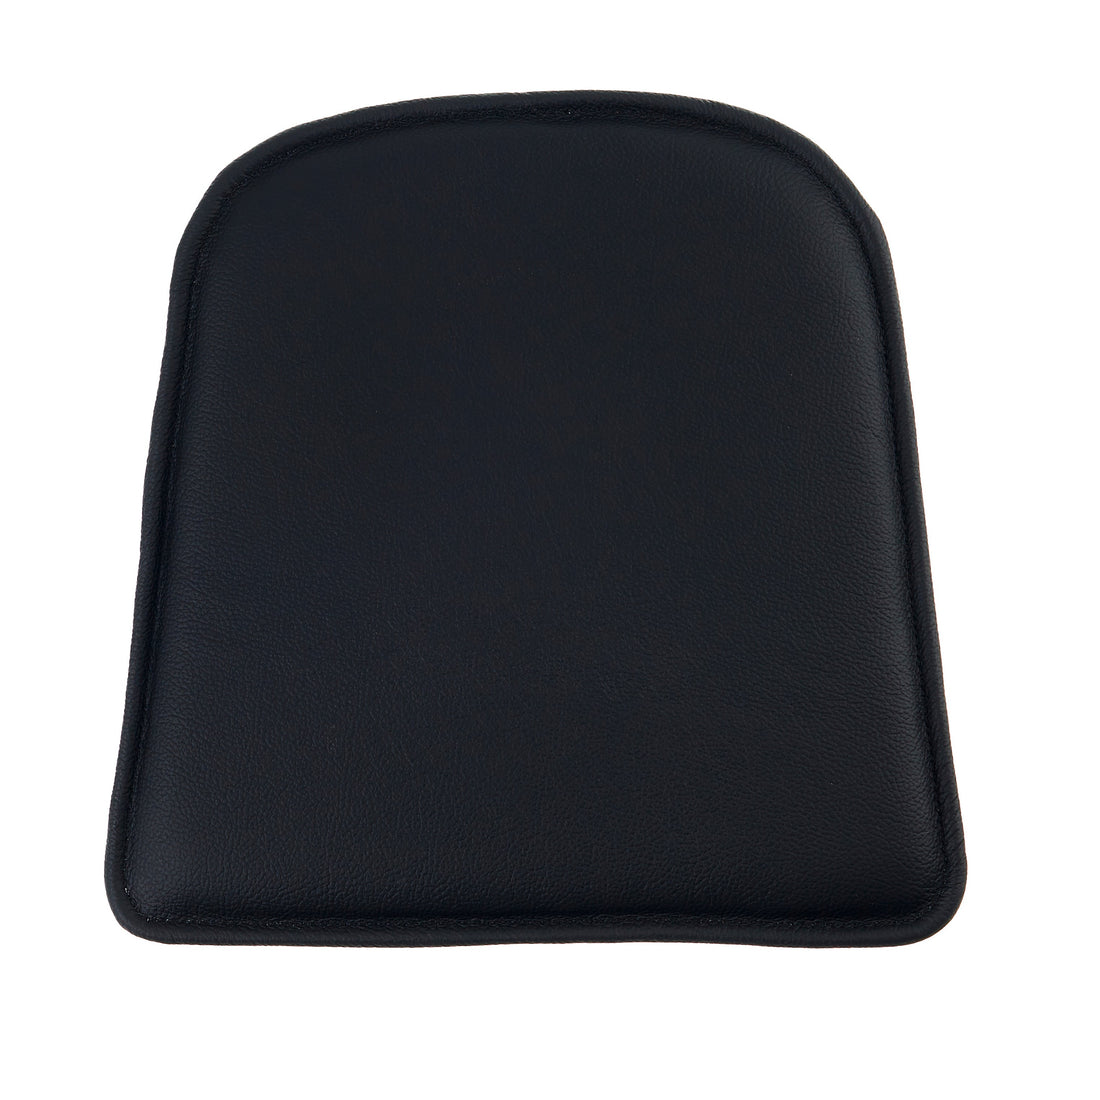 Cushion to xavier puchard tolix chair in black leather